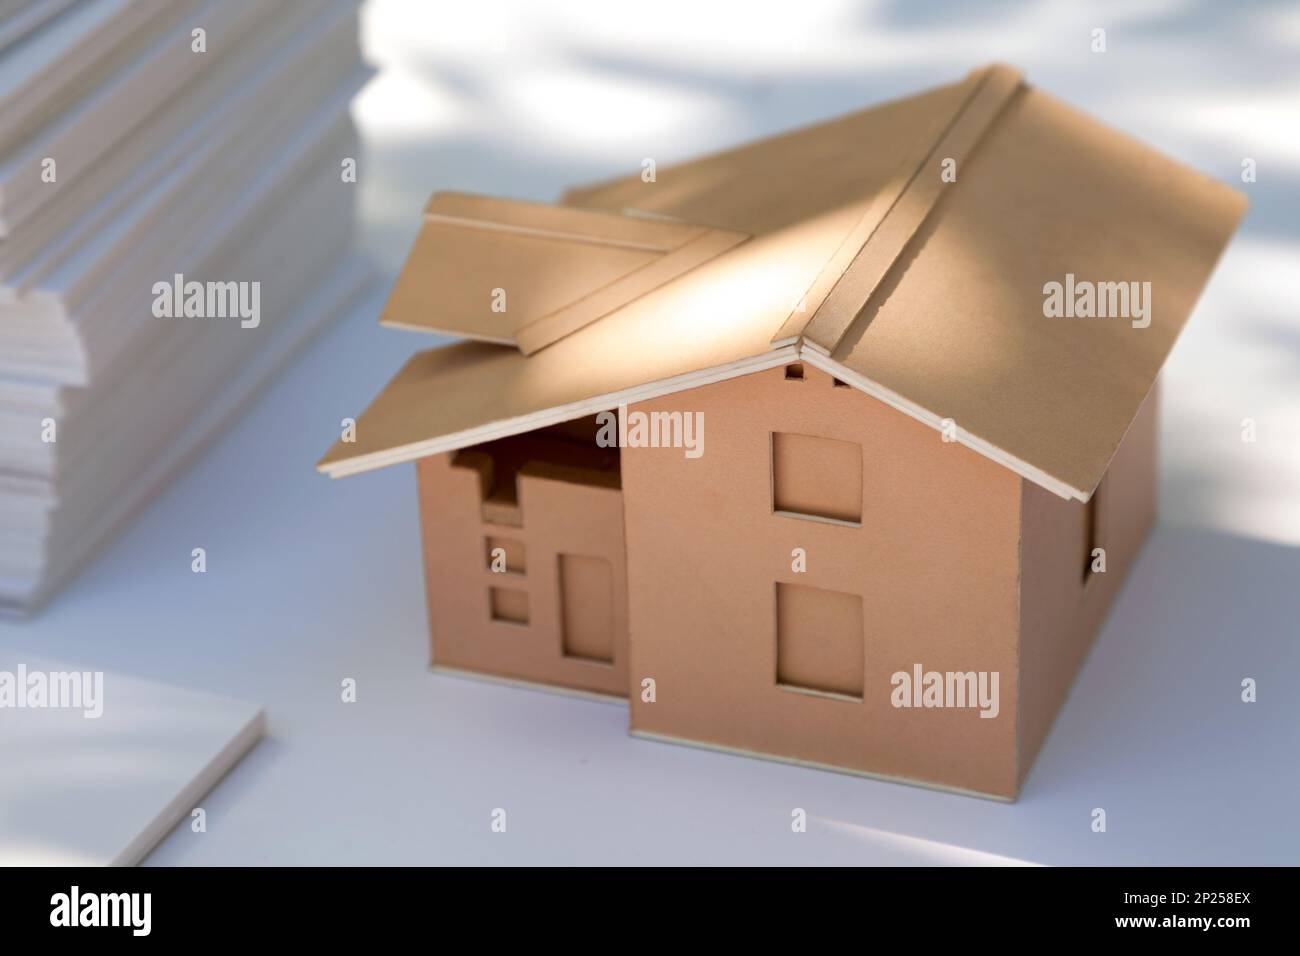 Small cardboard house model on white. New home design for sale. Abstract cardboard real estate miniature in the sunlight Stock Photo